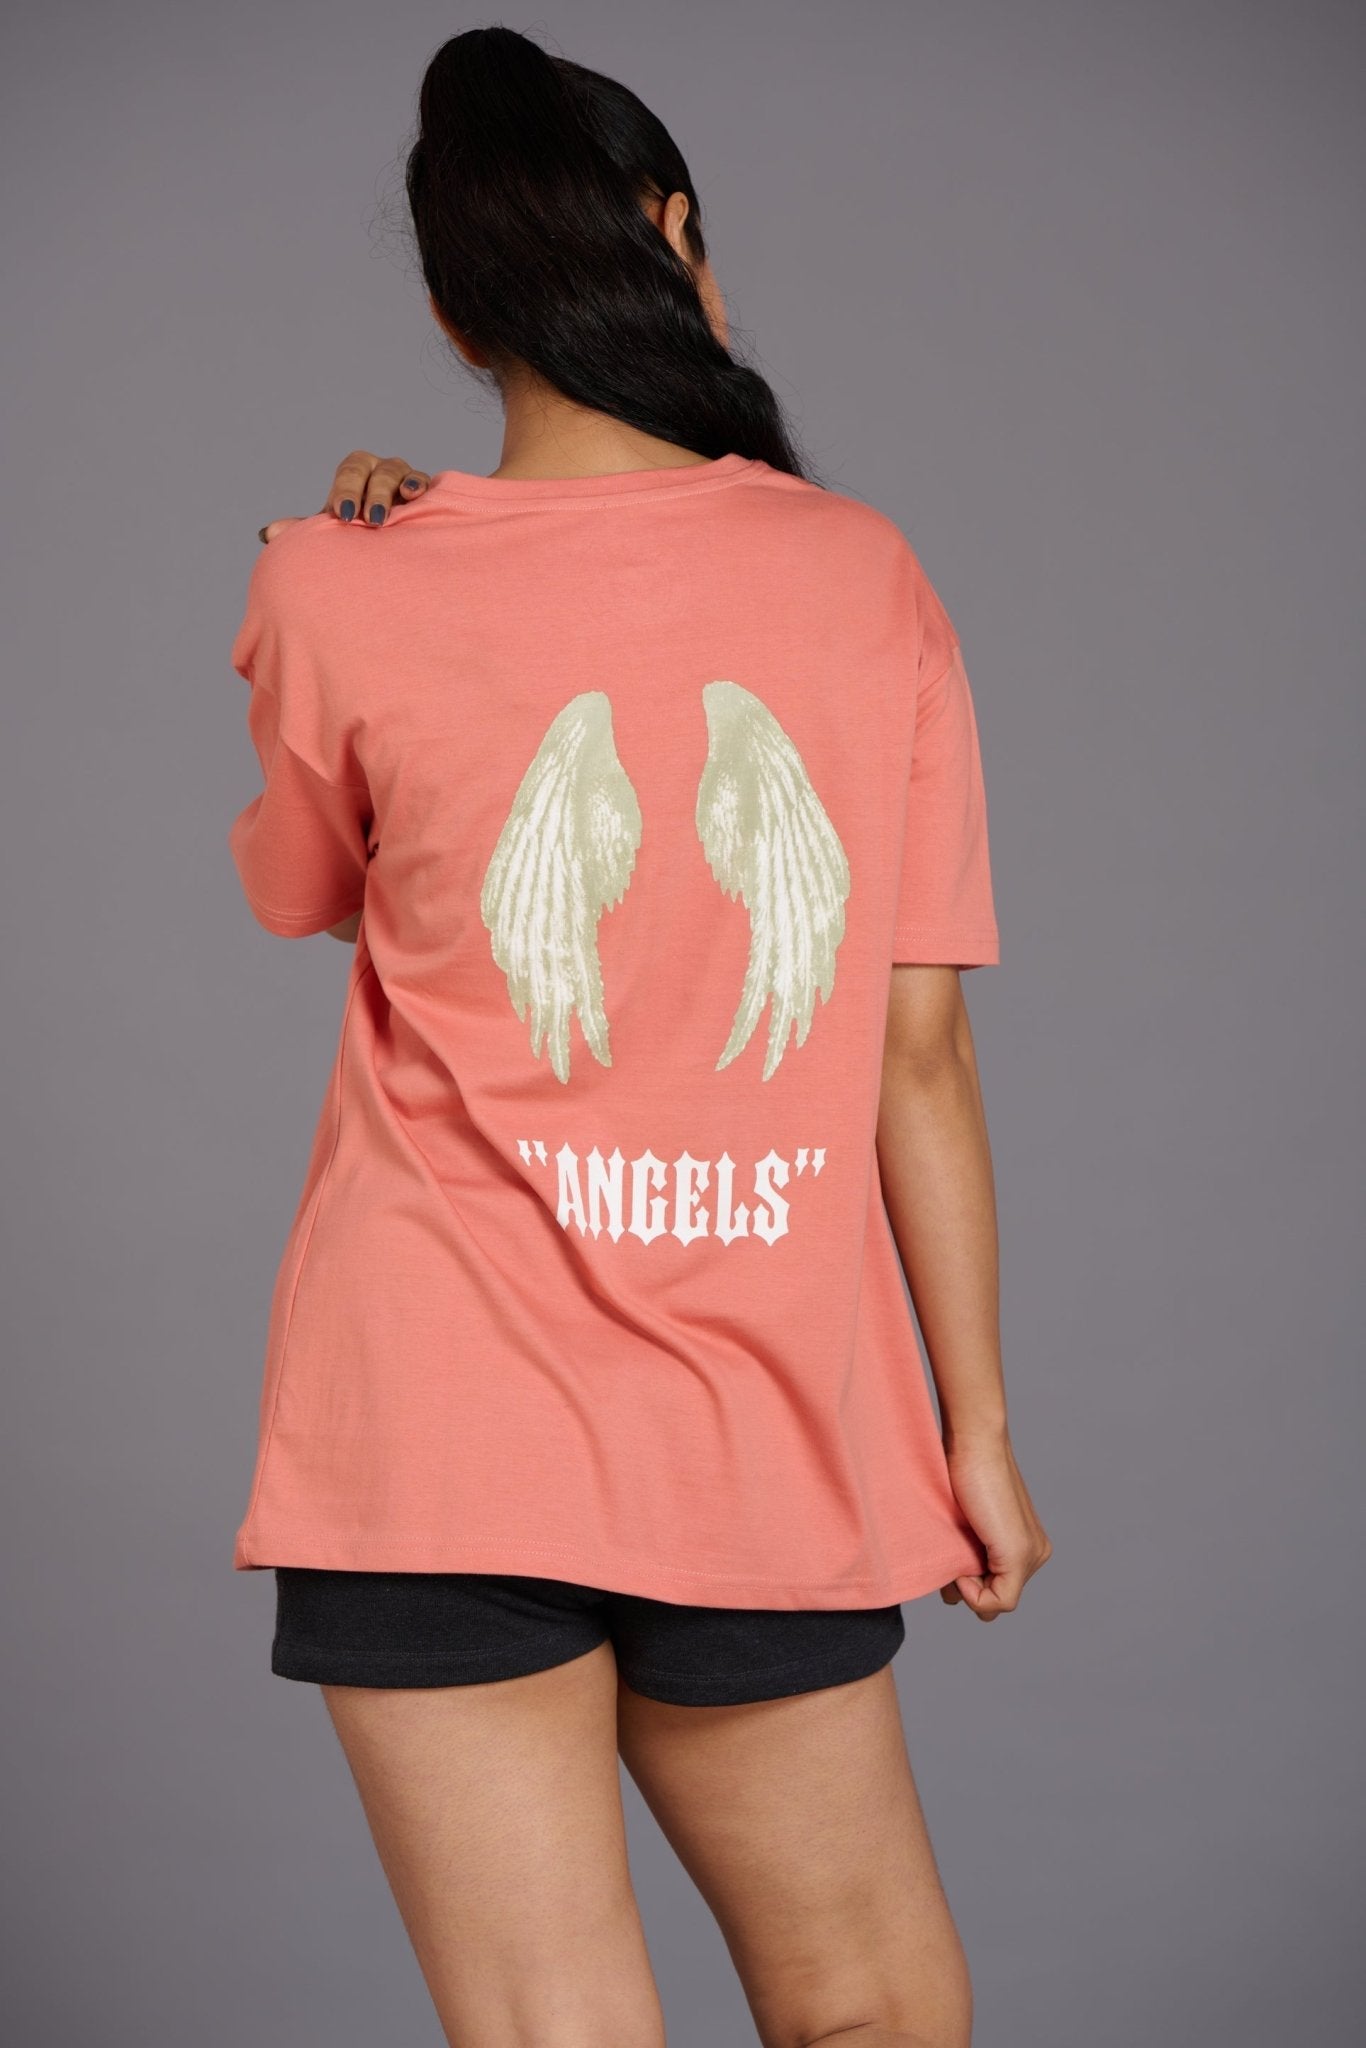 Angels Wings Over-Sized for Women by Go Devil - Go Devil